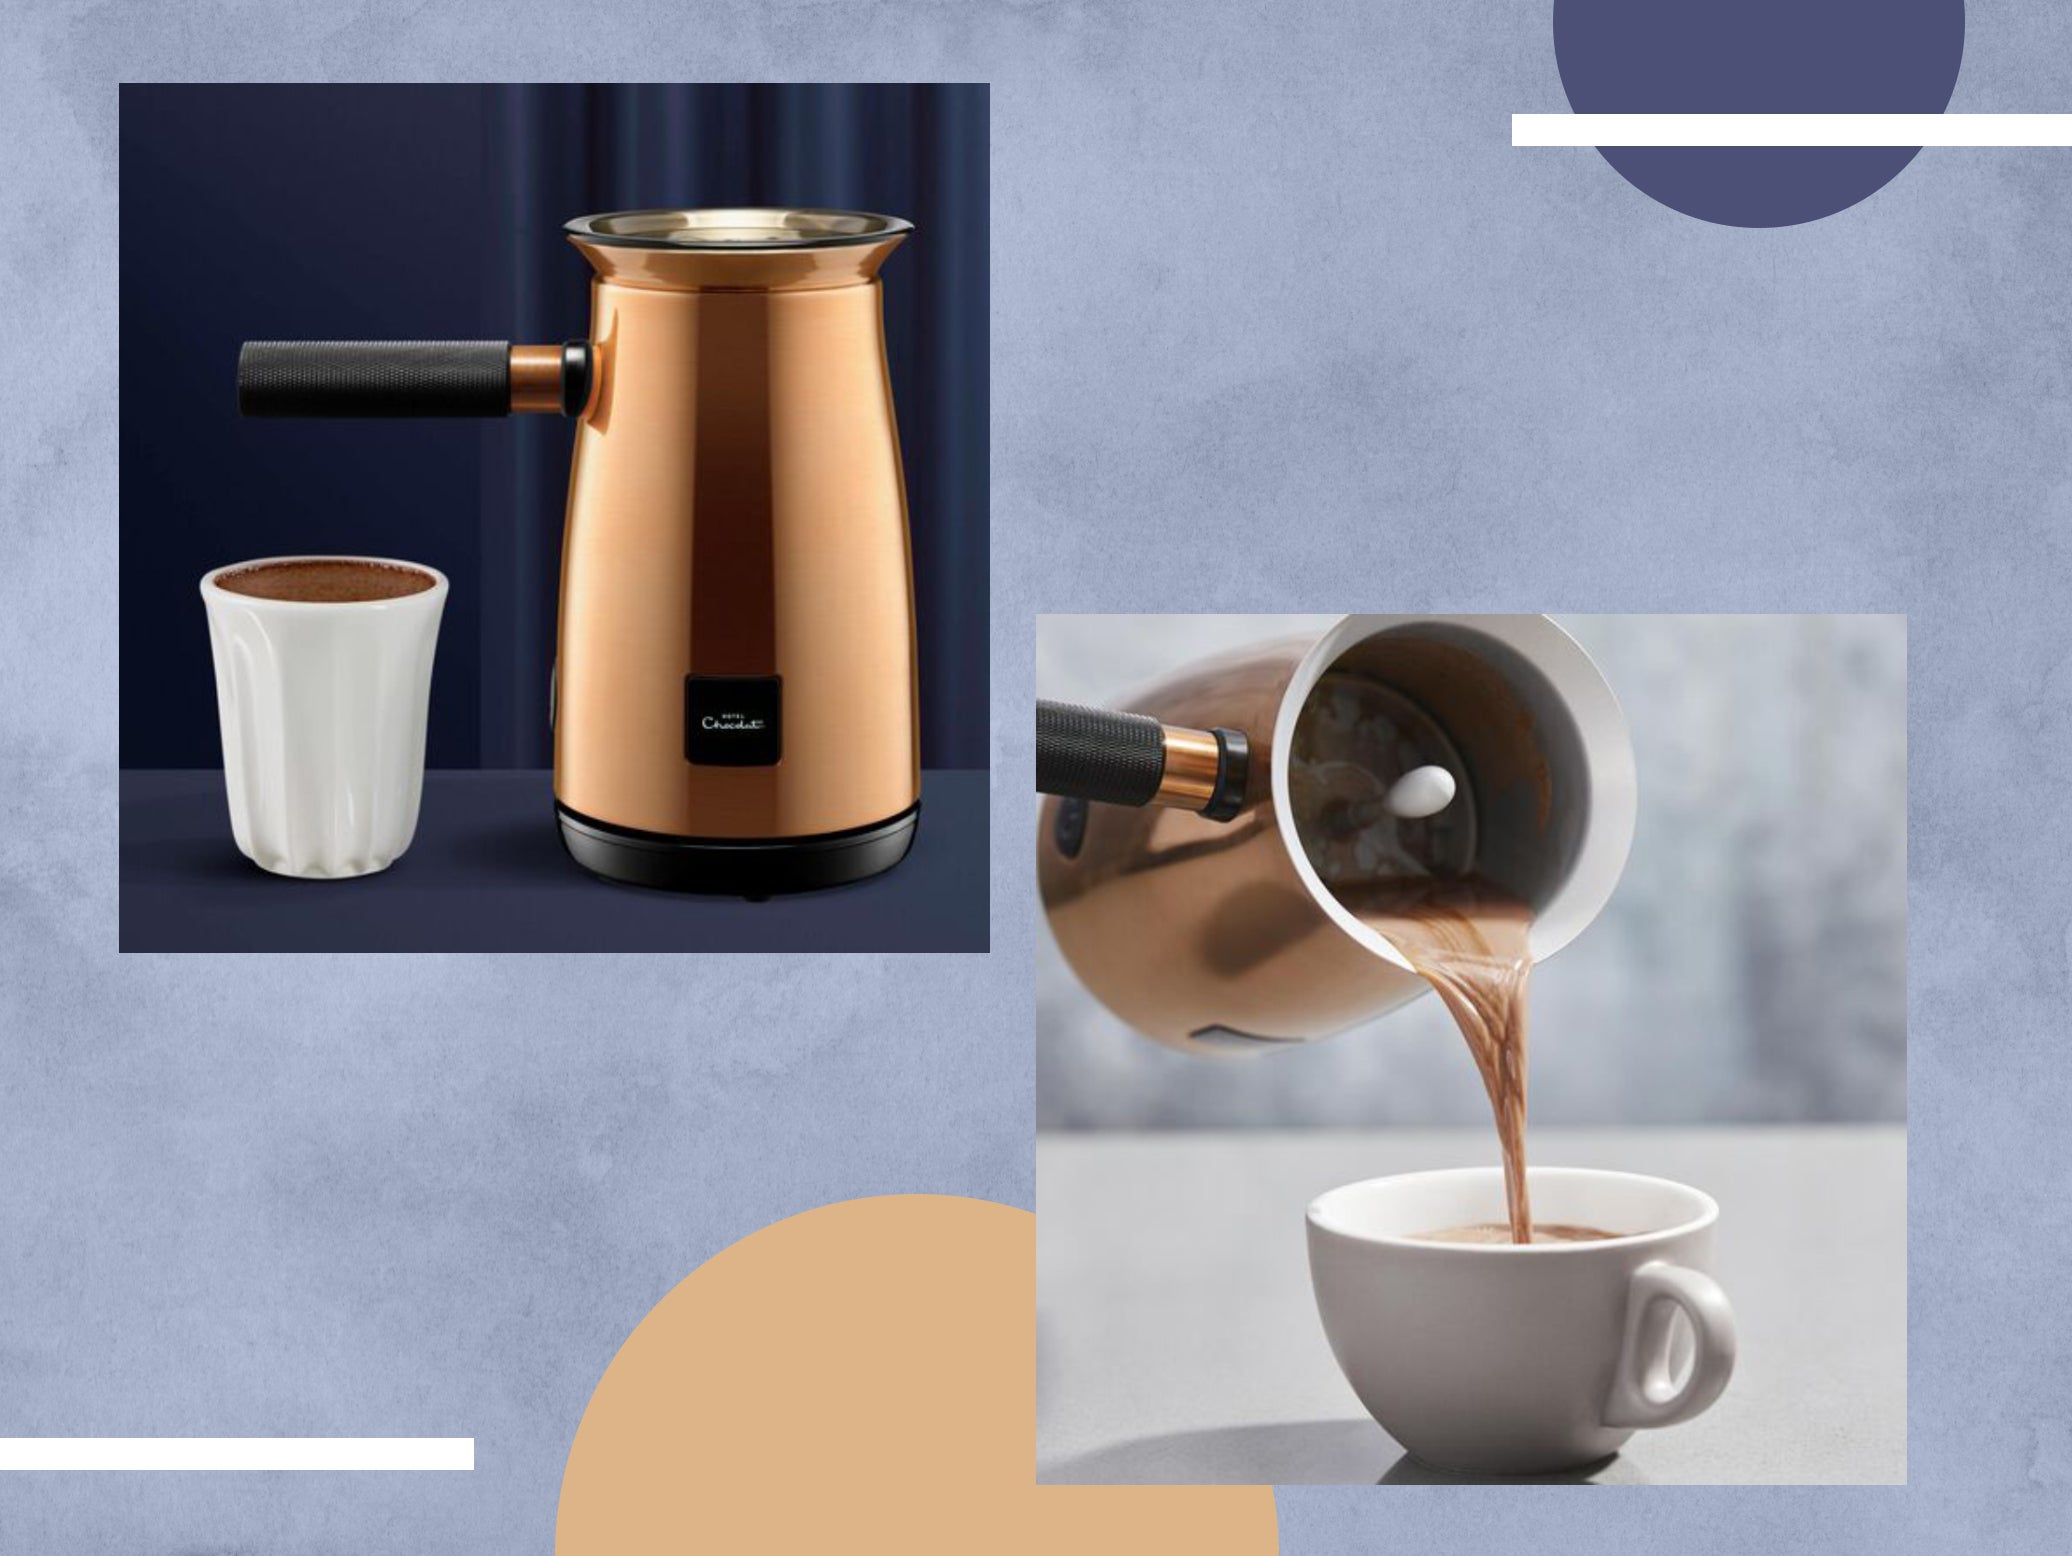 Our reviewer found that it takes just two and a half minutes to create a ‘Willy Wonka worthy’ hot chocolate with this appliance